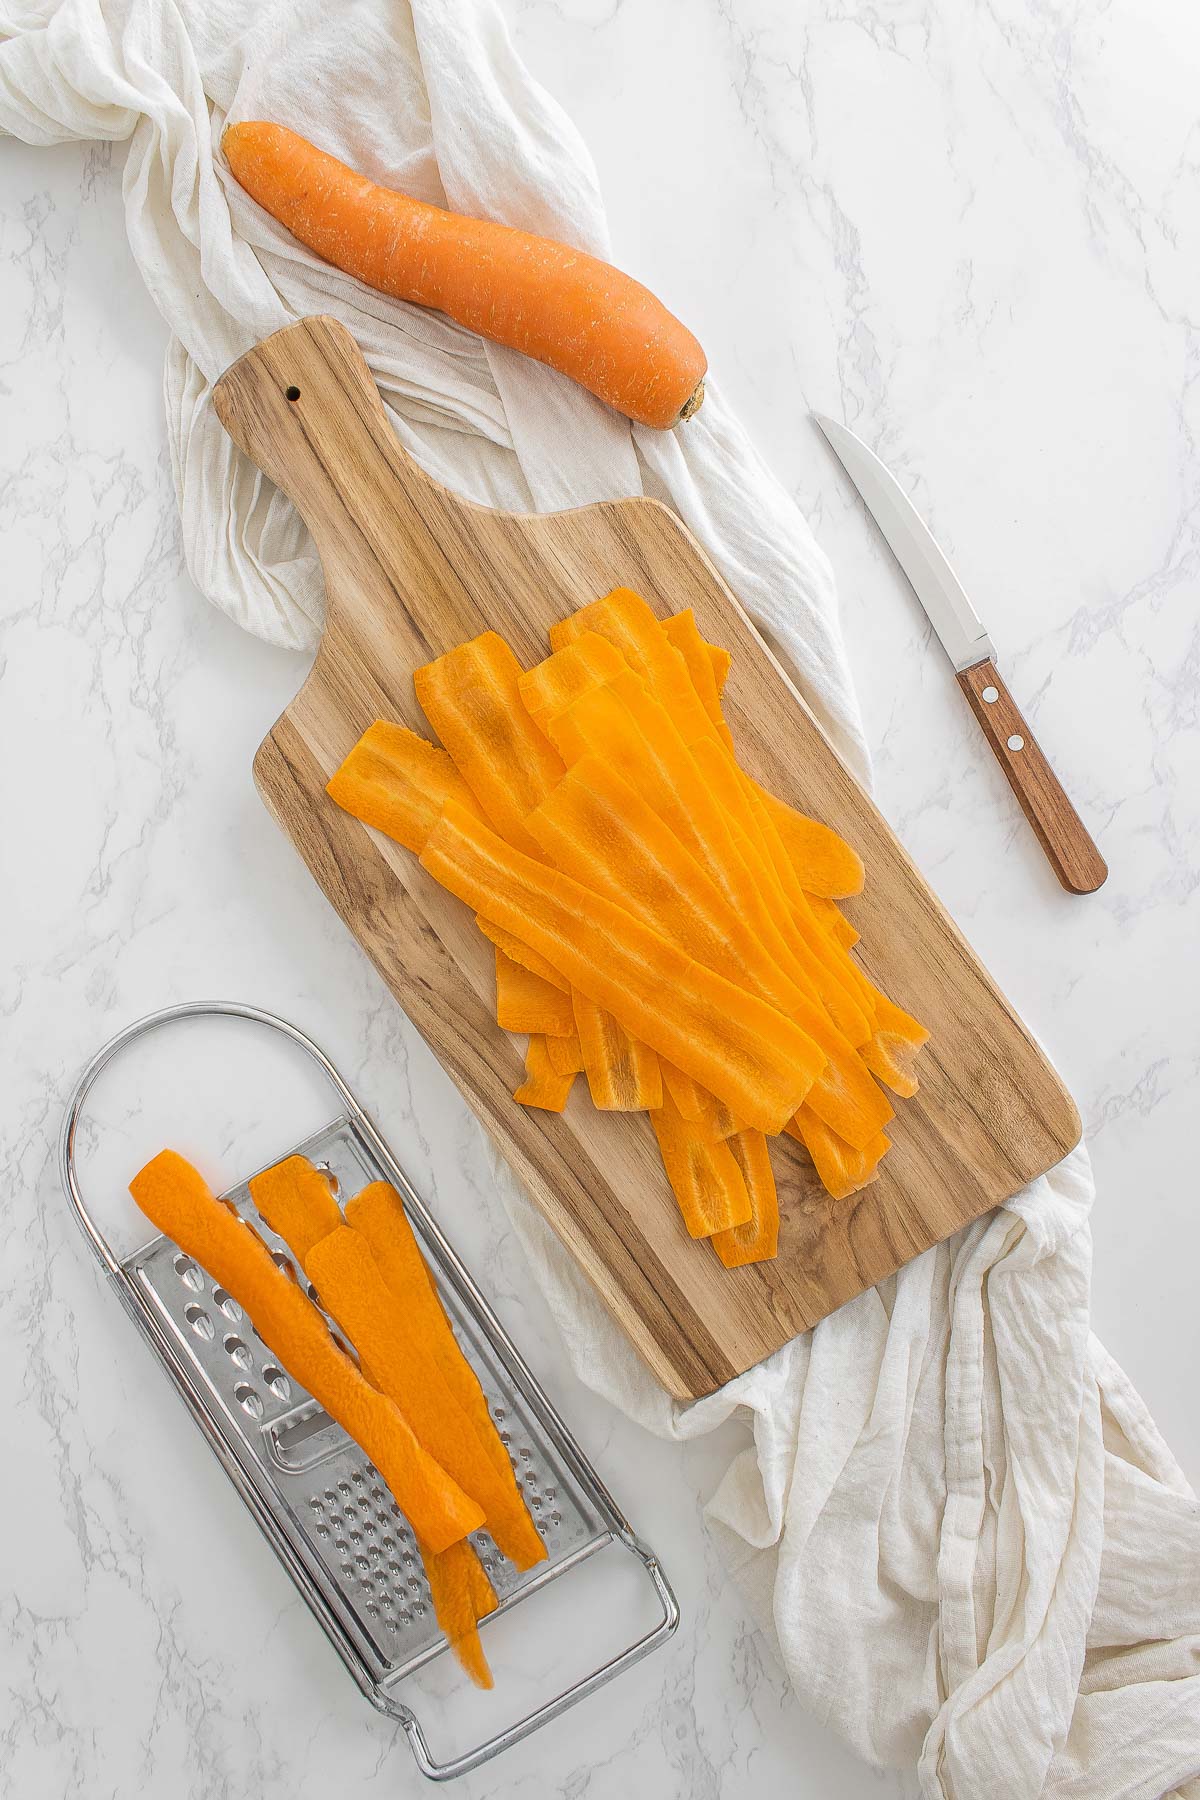 carrots being sliced on a grater with sliced on a wooden cutting board, with a knife.